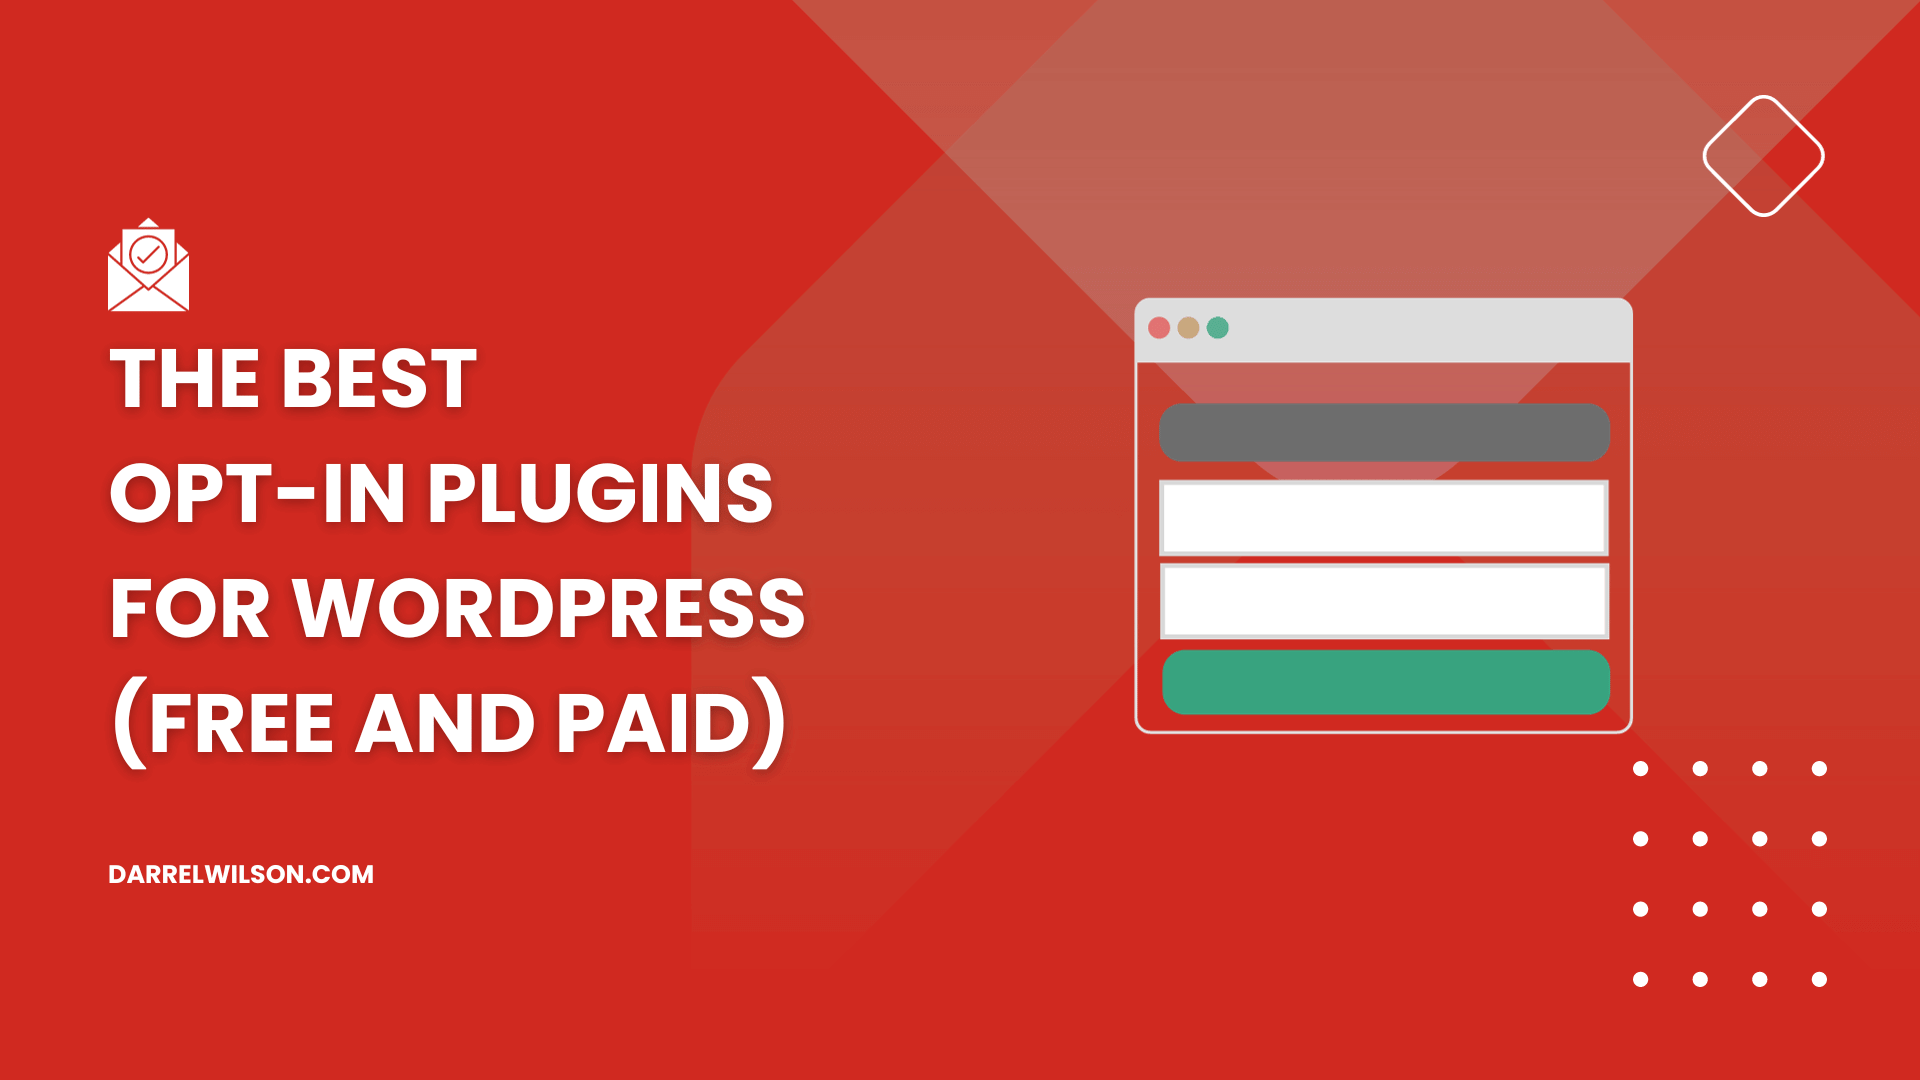 The Best Opt-in Plugins for WordPress (Free and Paid)